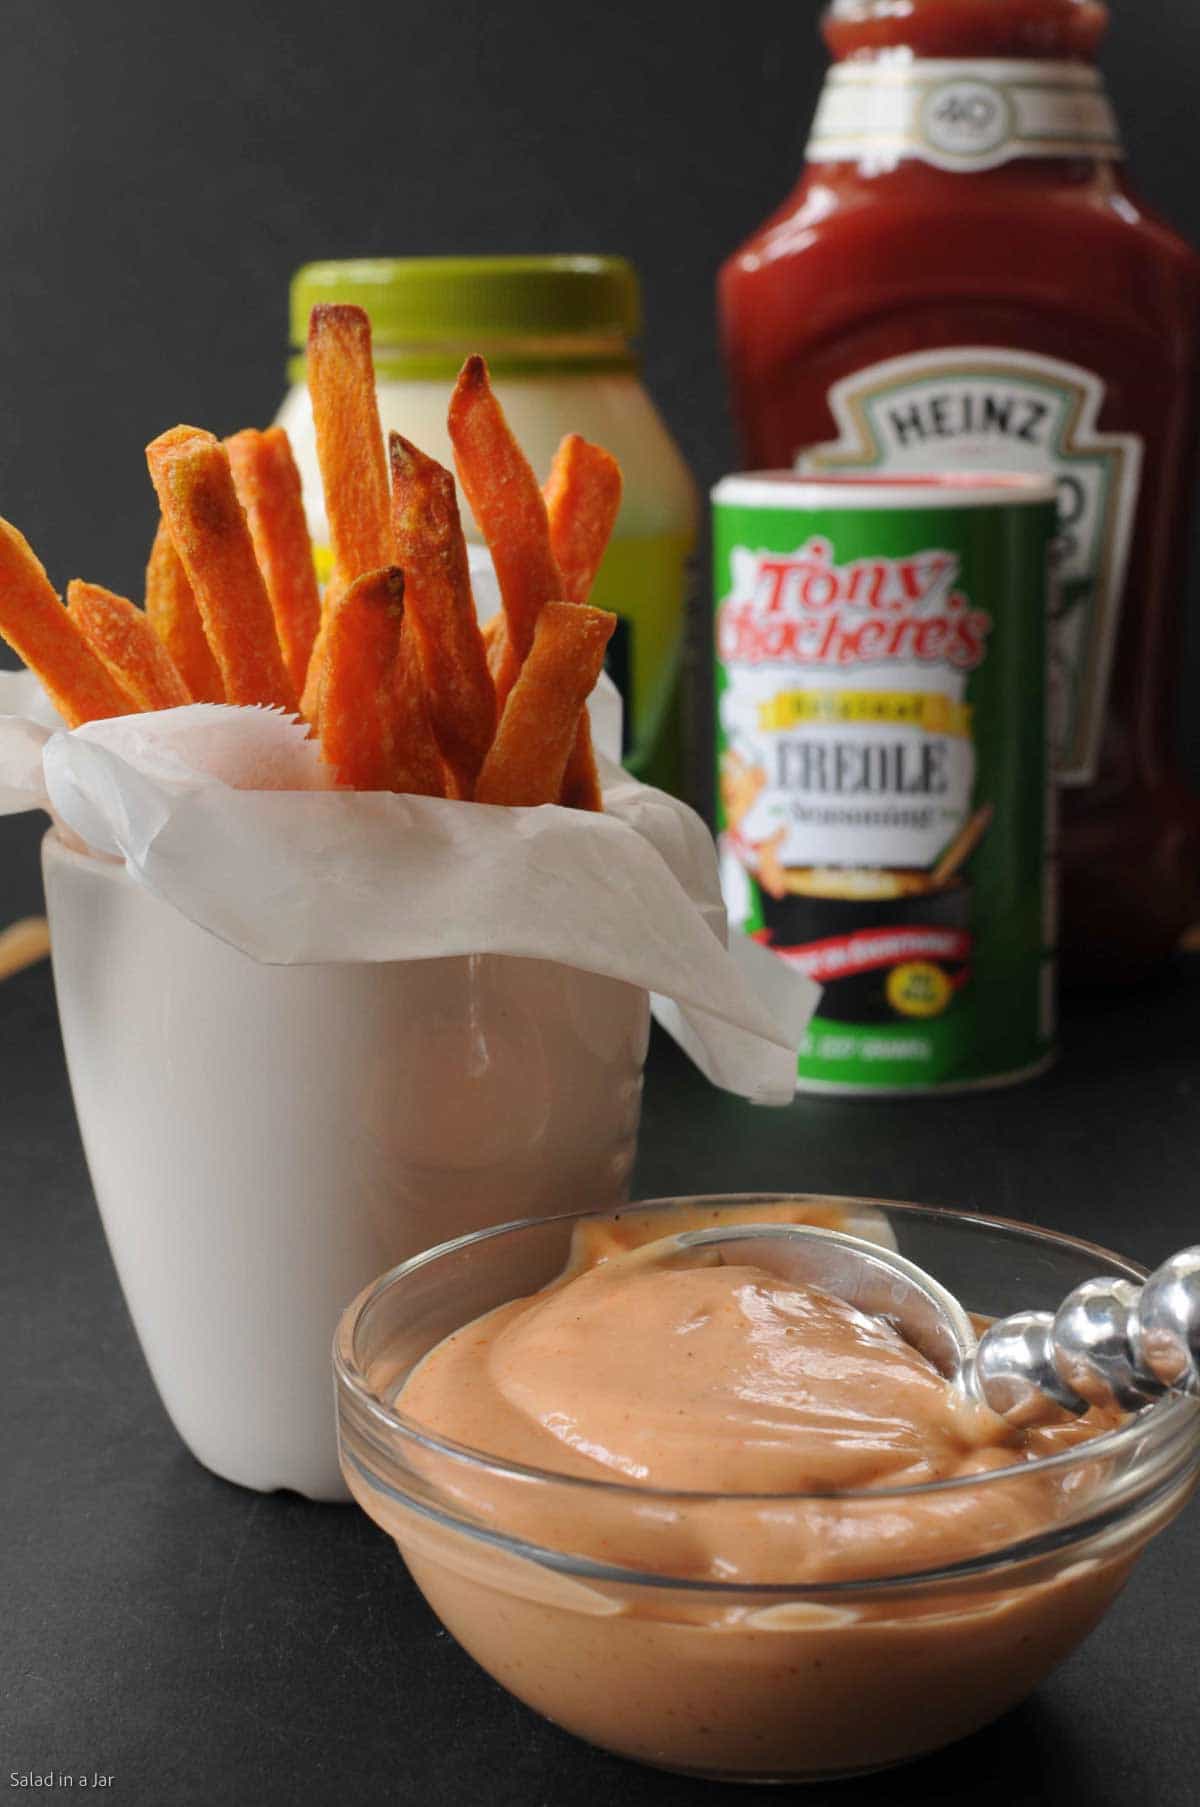 cajun dipping sauce shown with sweet potato fries and other ingredients